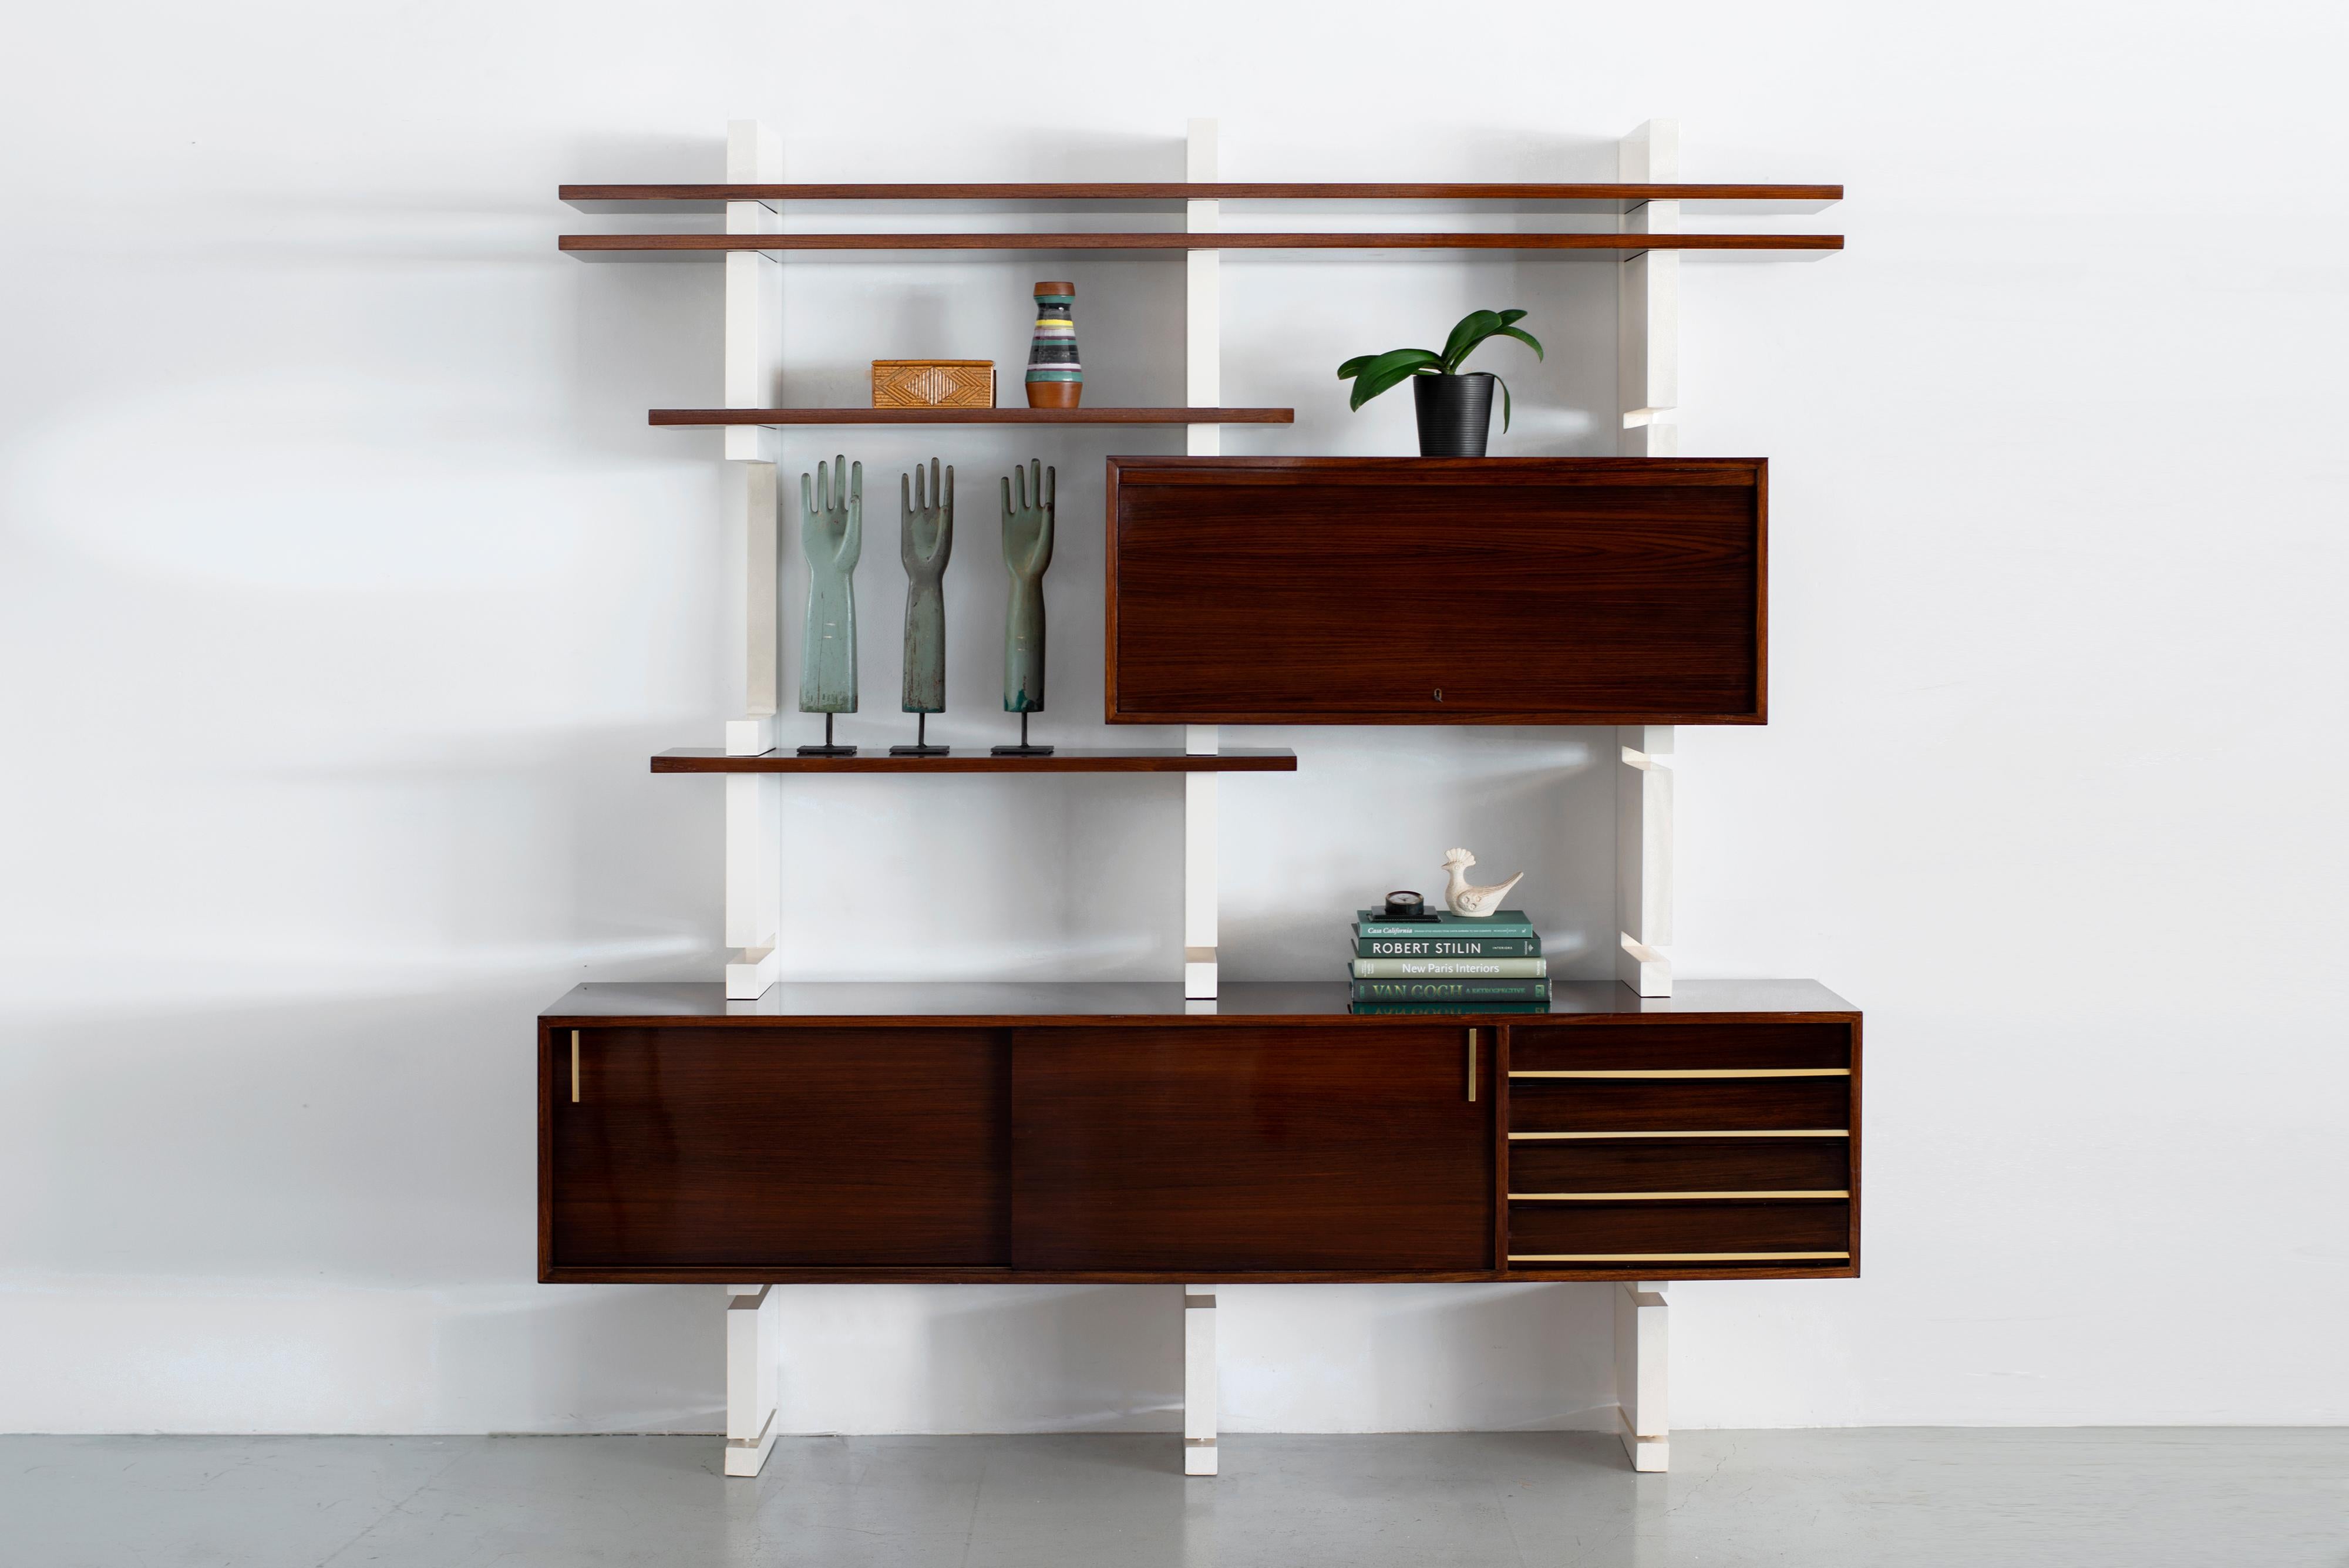 Modular bookcase beautifully refinished - Amma, Turin - Italy, 1960s

Floating rosewood cabinet with brass hardware - adjustable shelves and cabinet that opens to reveal drawers and more shelving. 

Newly lacquered wood supports. 

Gorgeous